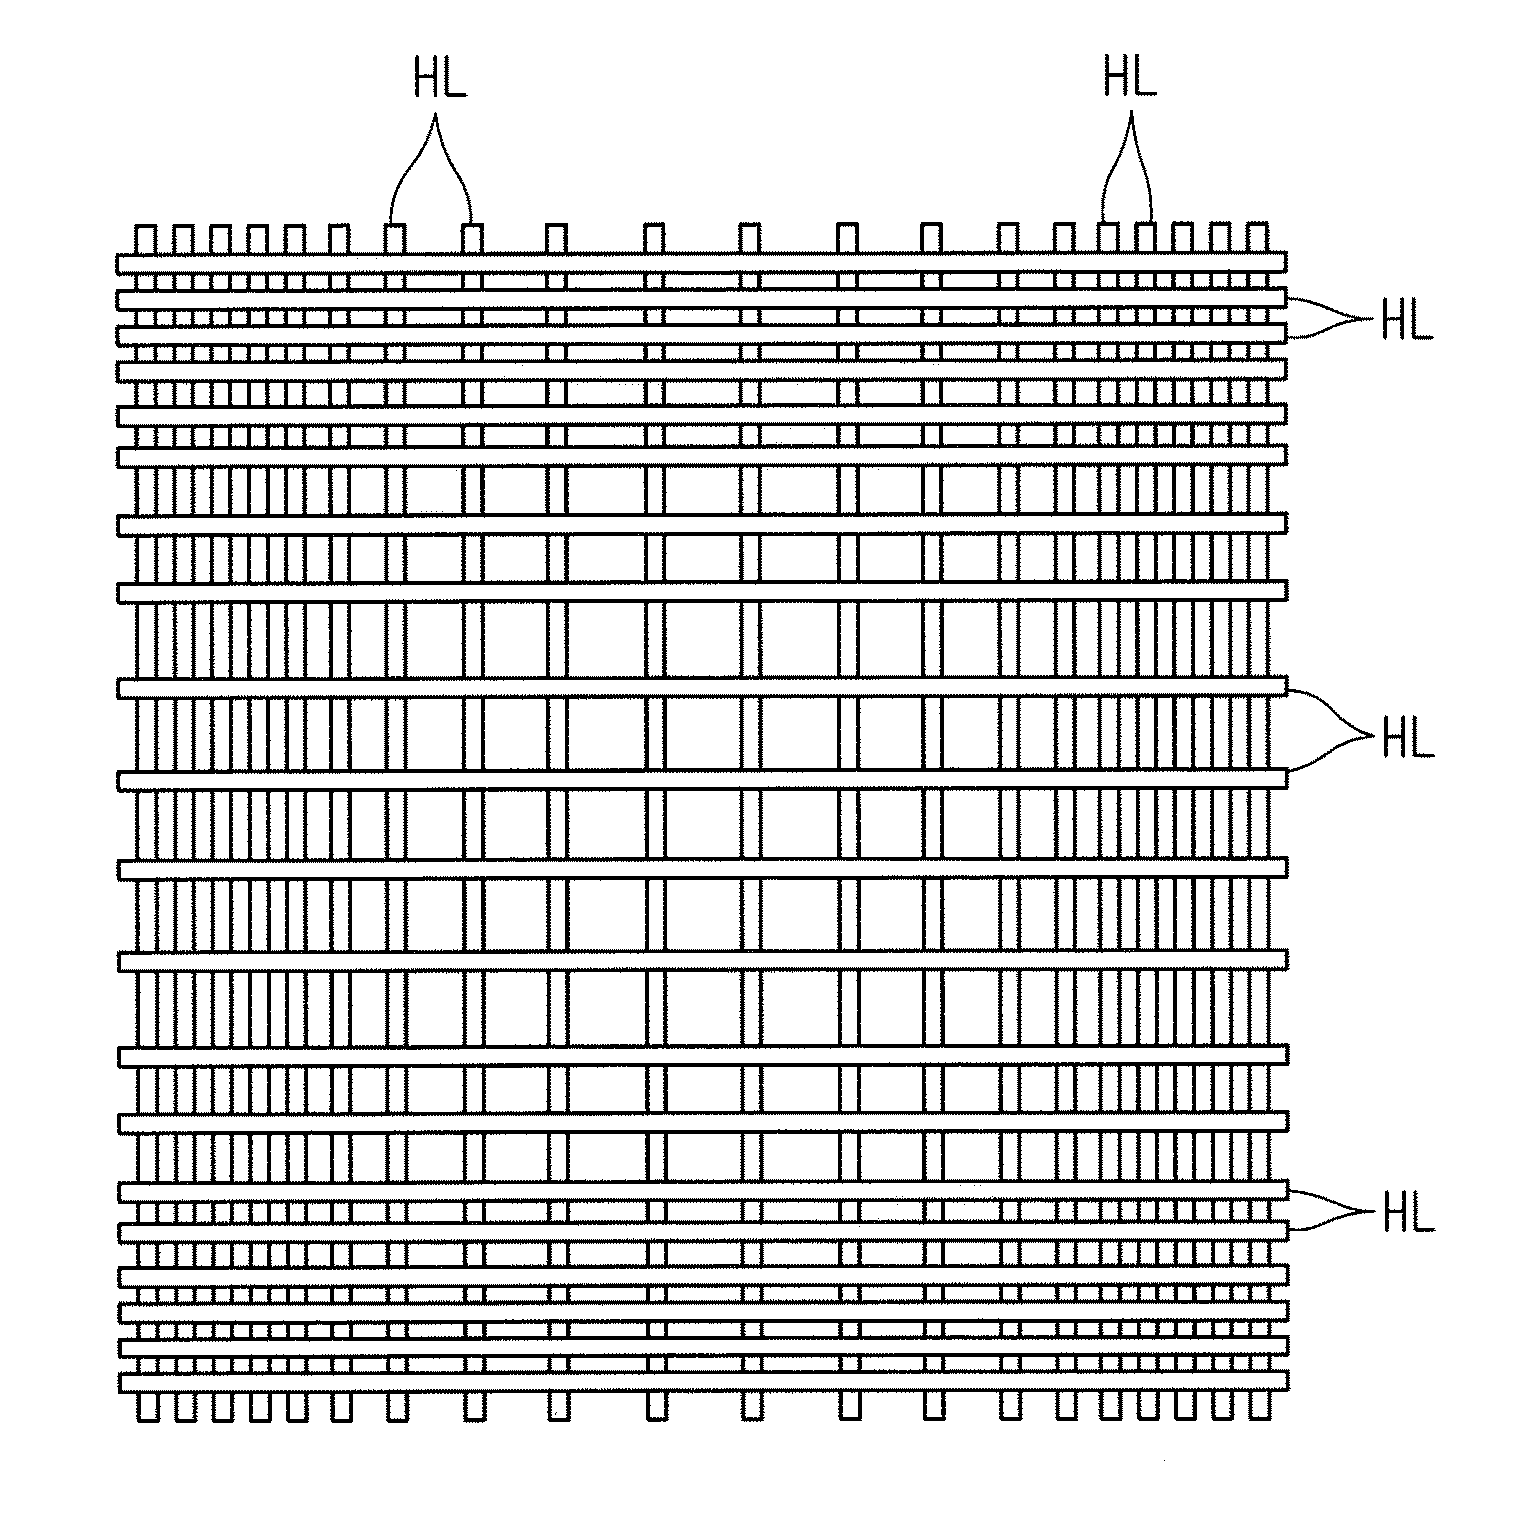 Light-irradiation type thermal processing method and thermal processing apparatus